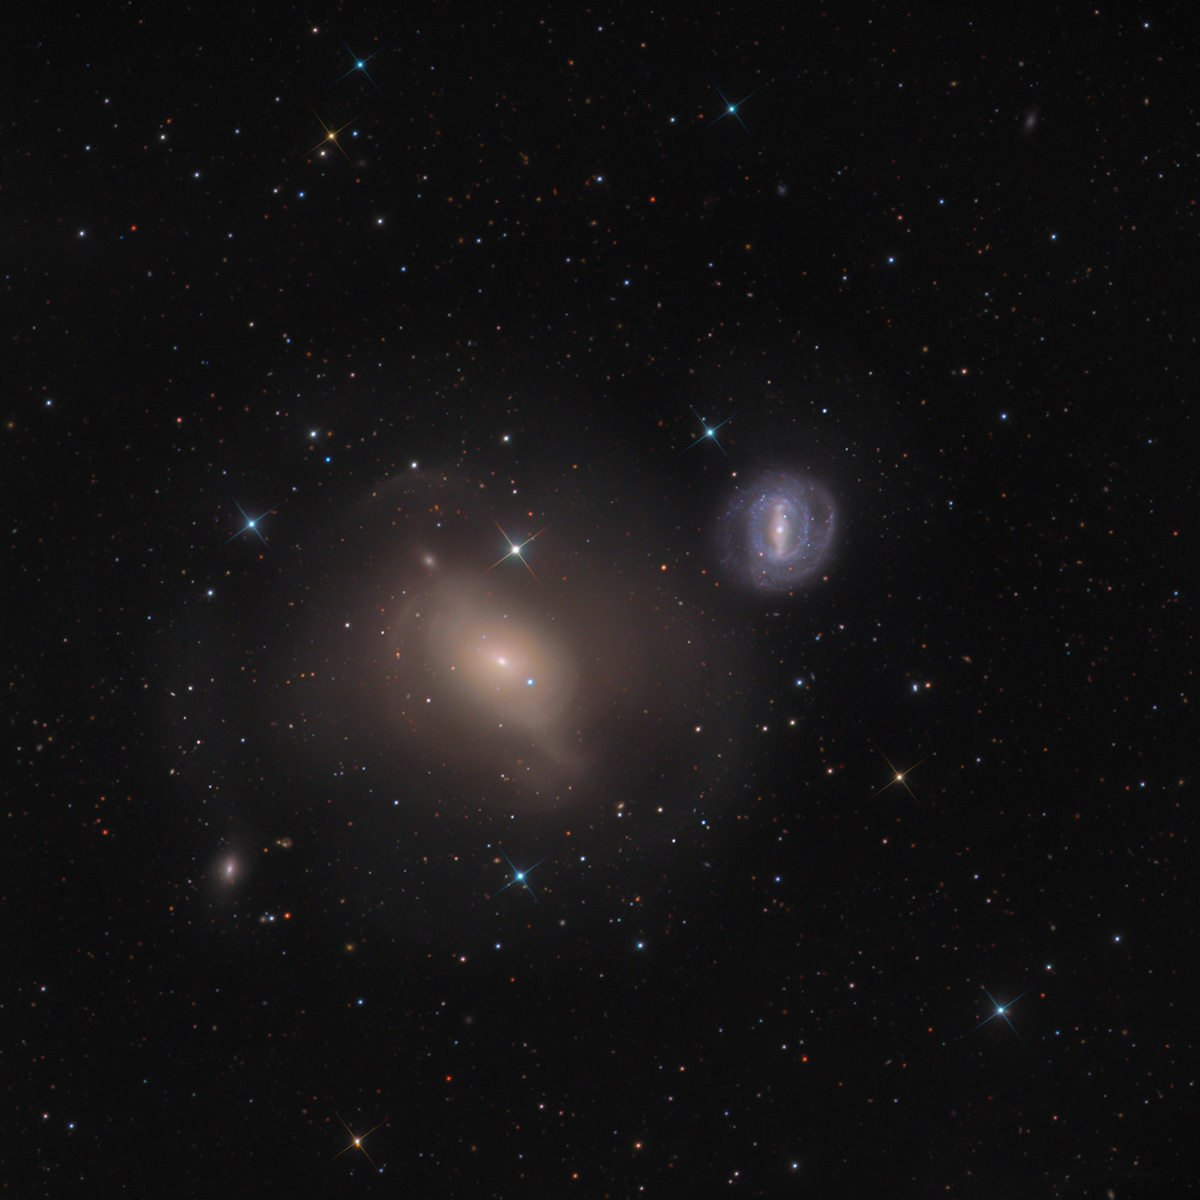 Messier 85 and NGC 4394 from SWO